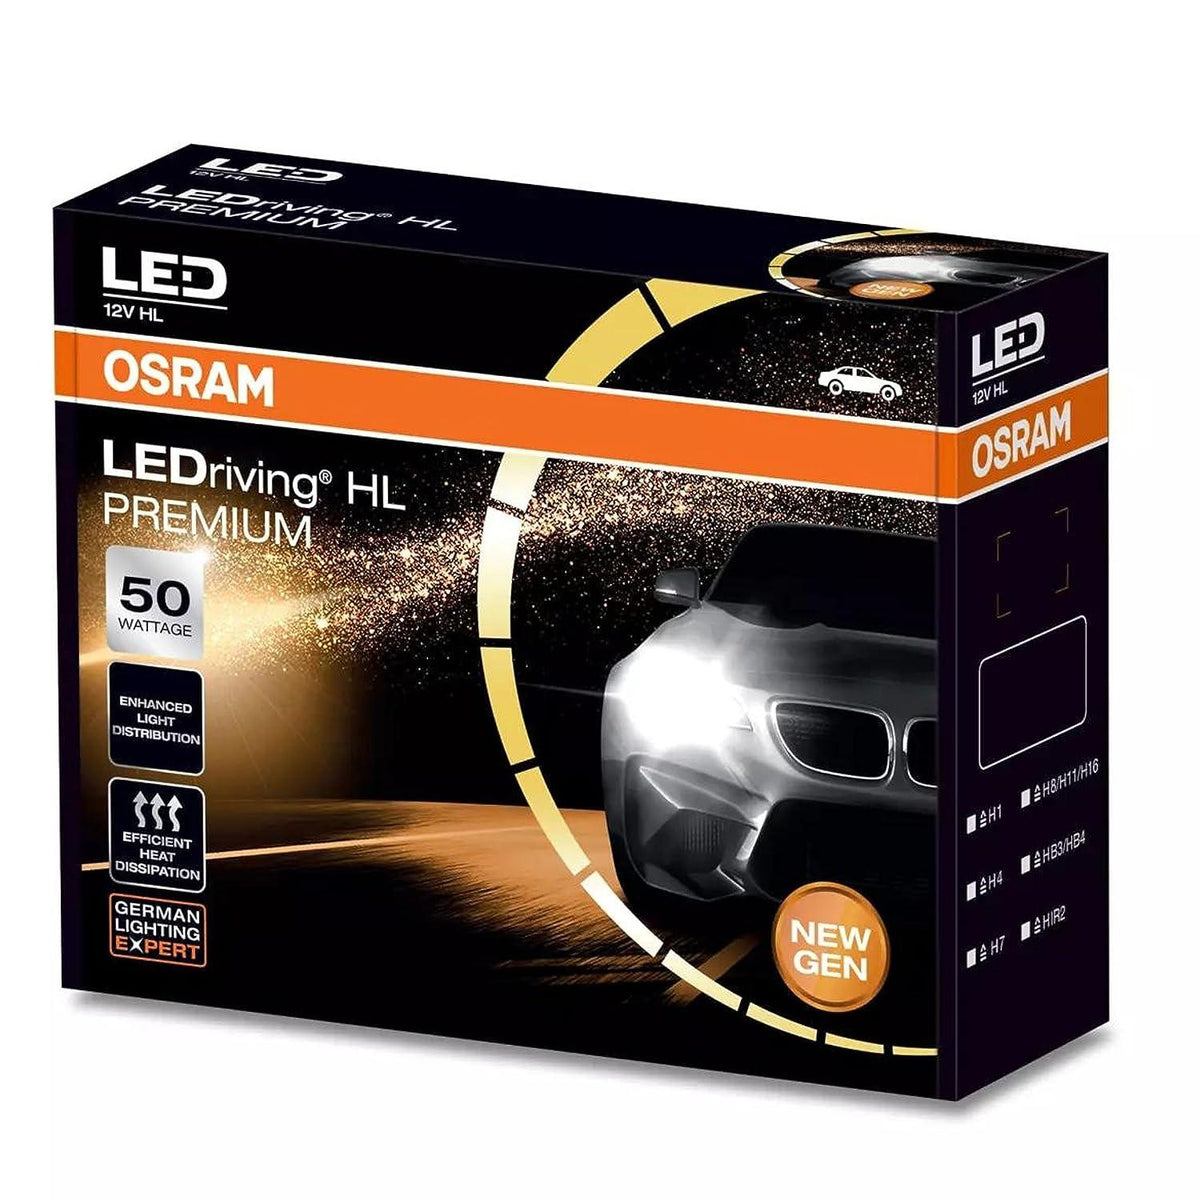 Which are the best LEDs for your car? OSRAM vs the Chinese - LED